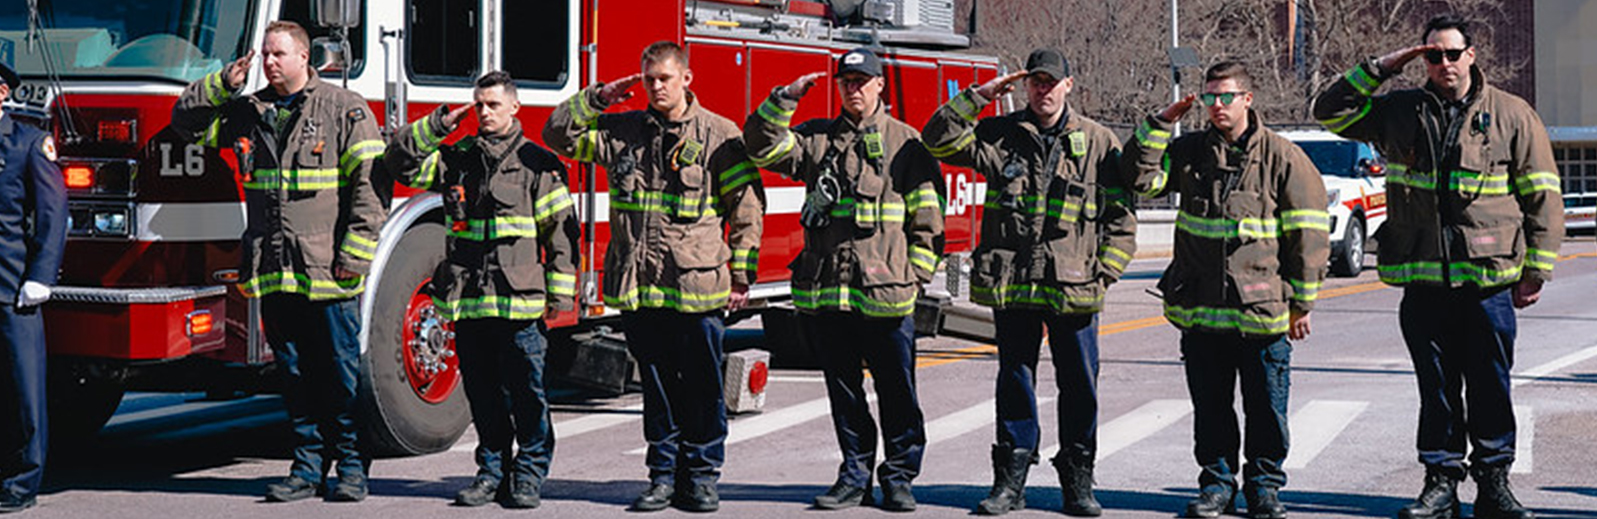 fire fighters standing in front of a truck